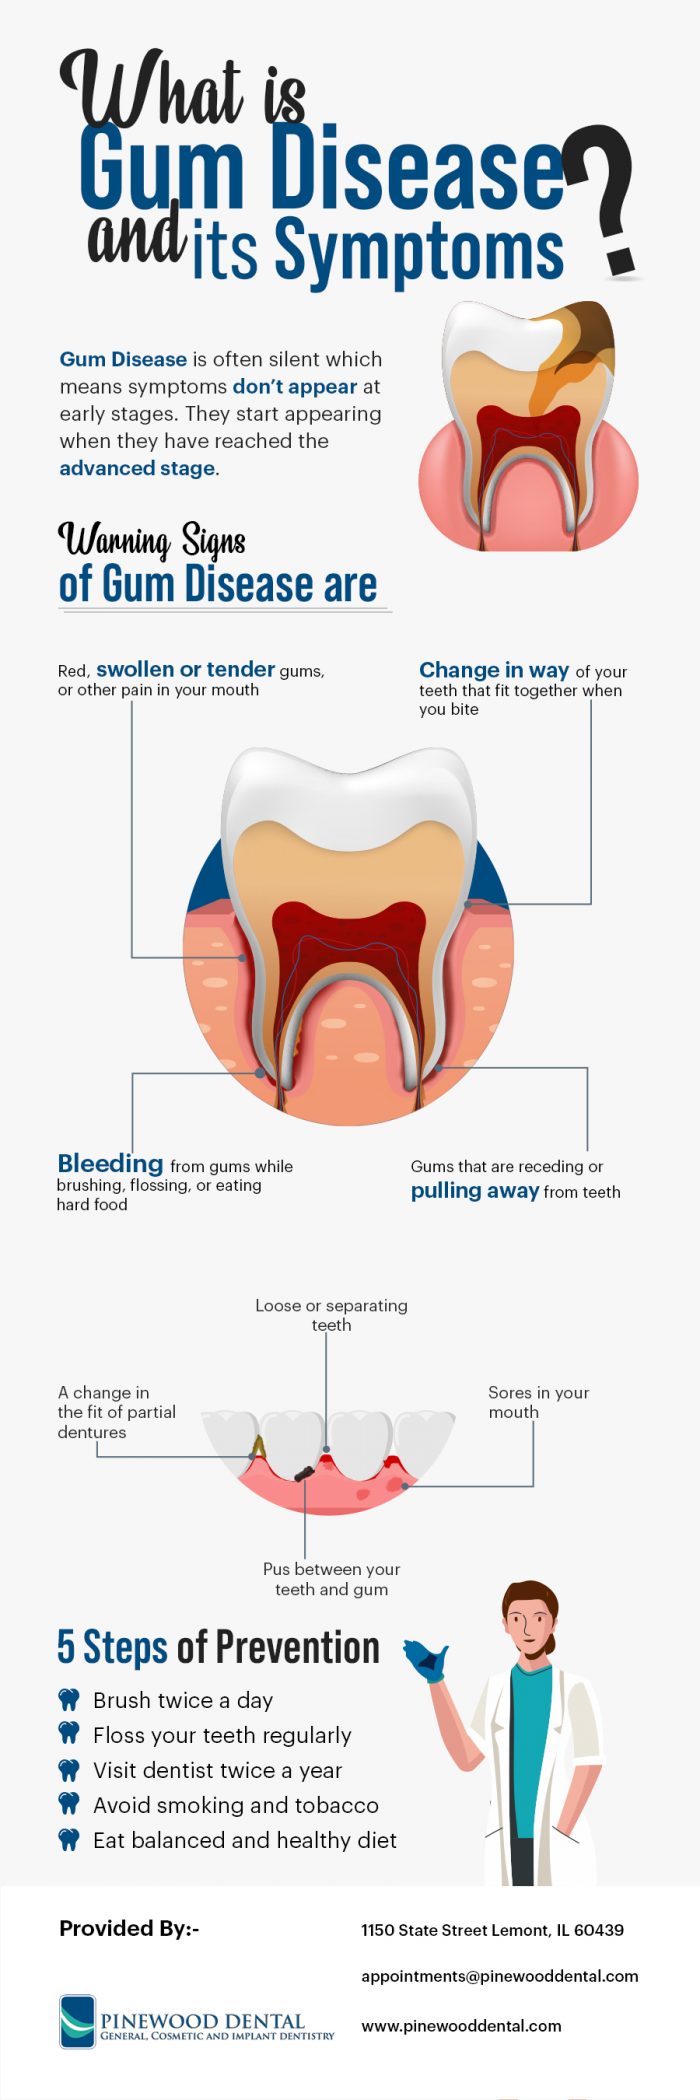 Get Excellent Gum Disease Treatment from Pinewood Dental at Lemont, IL